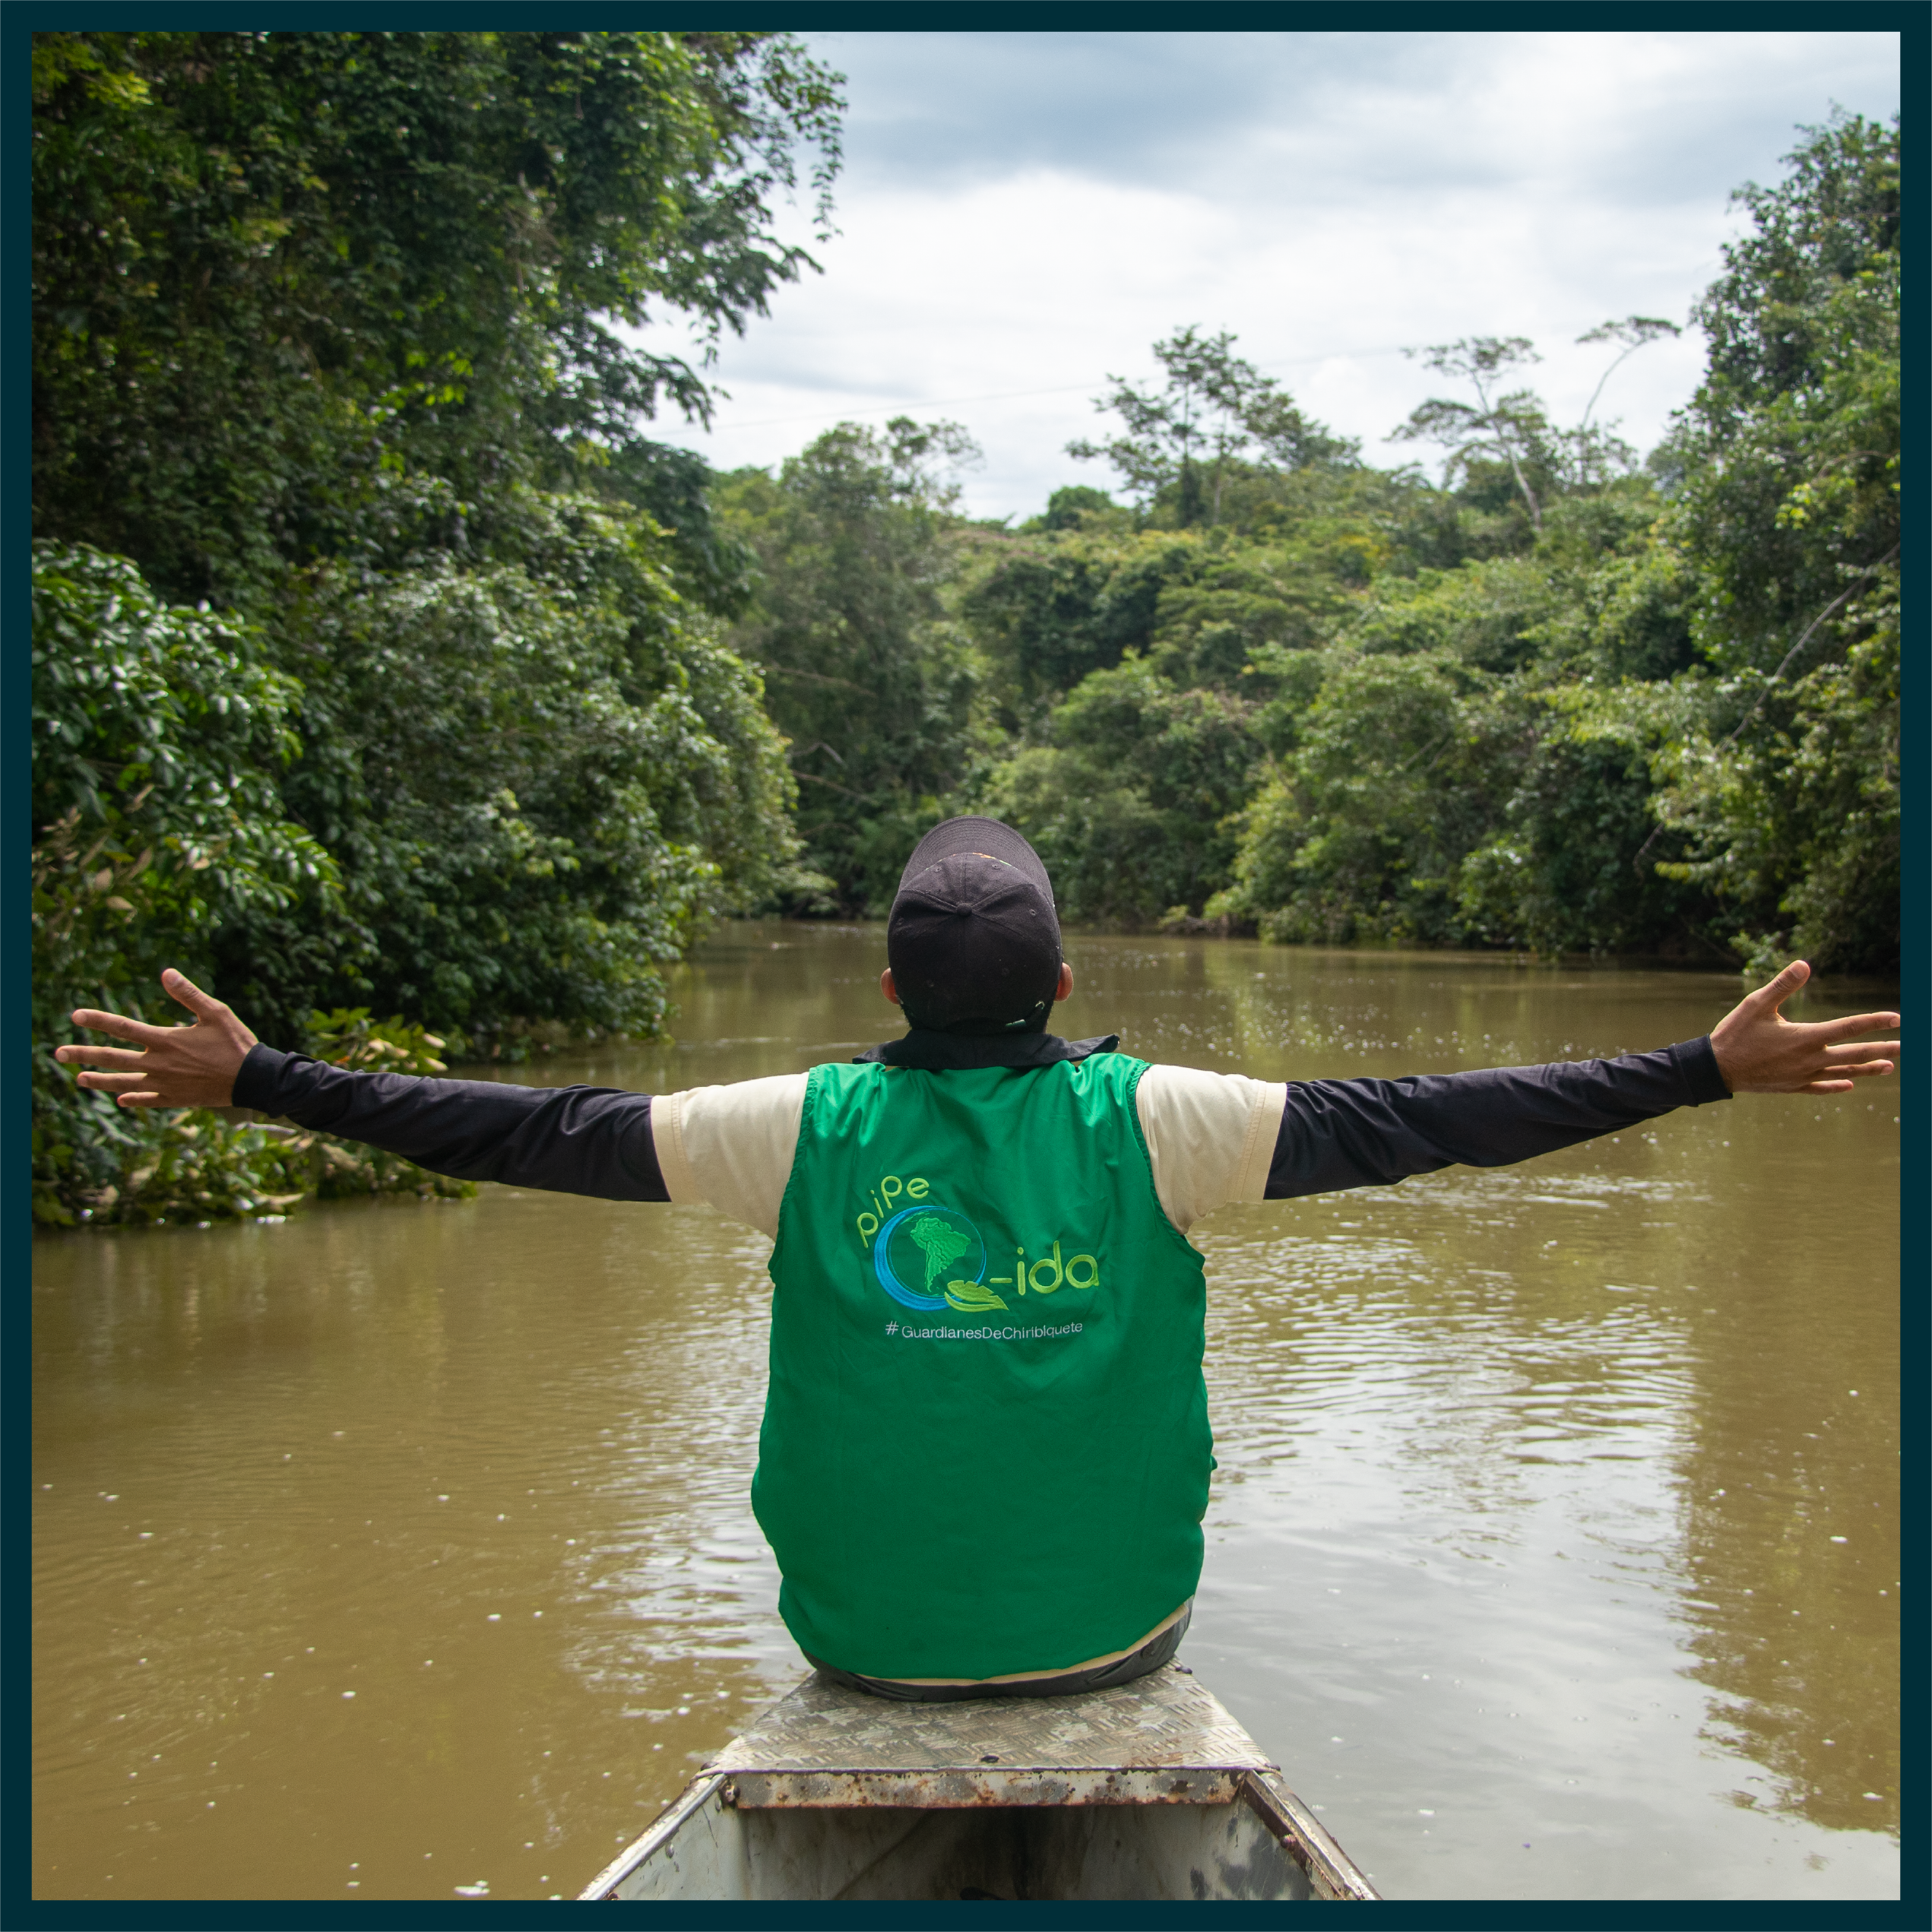 Image of Ambassador sat on the front of a long, wooden boat with arms outstretched, floating down a river in the jungle